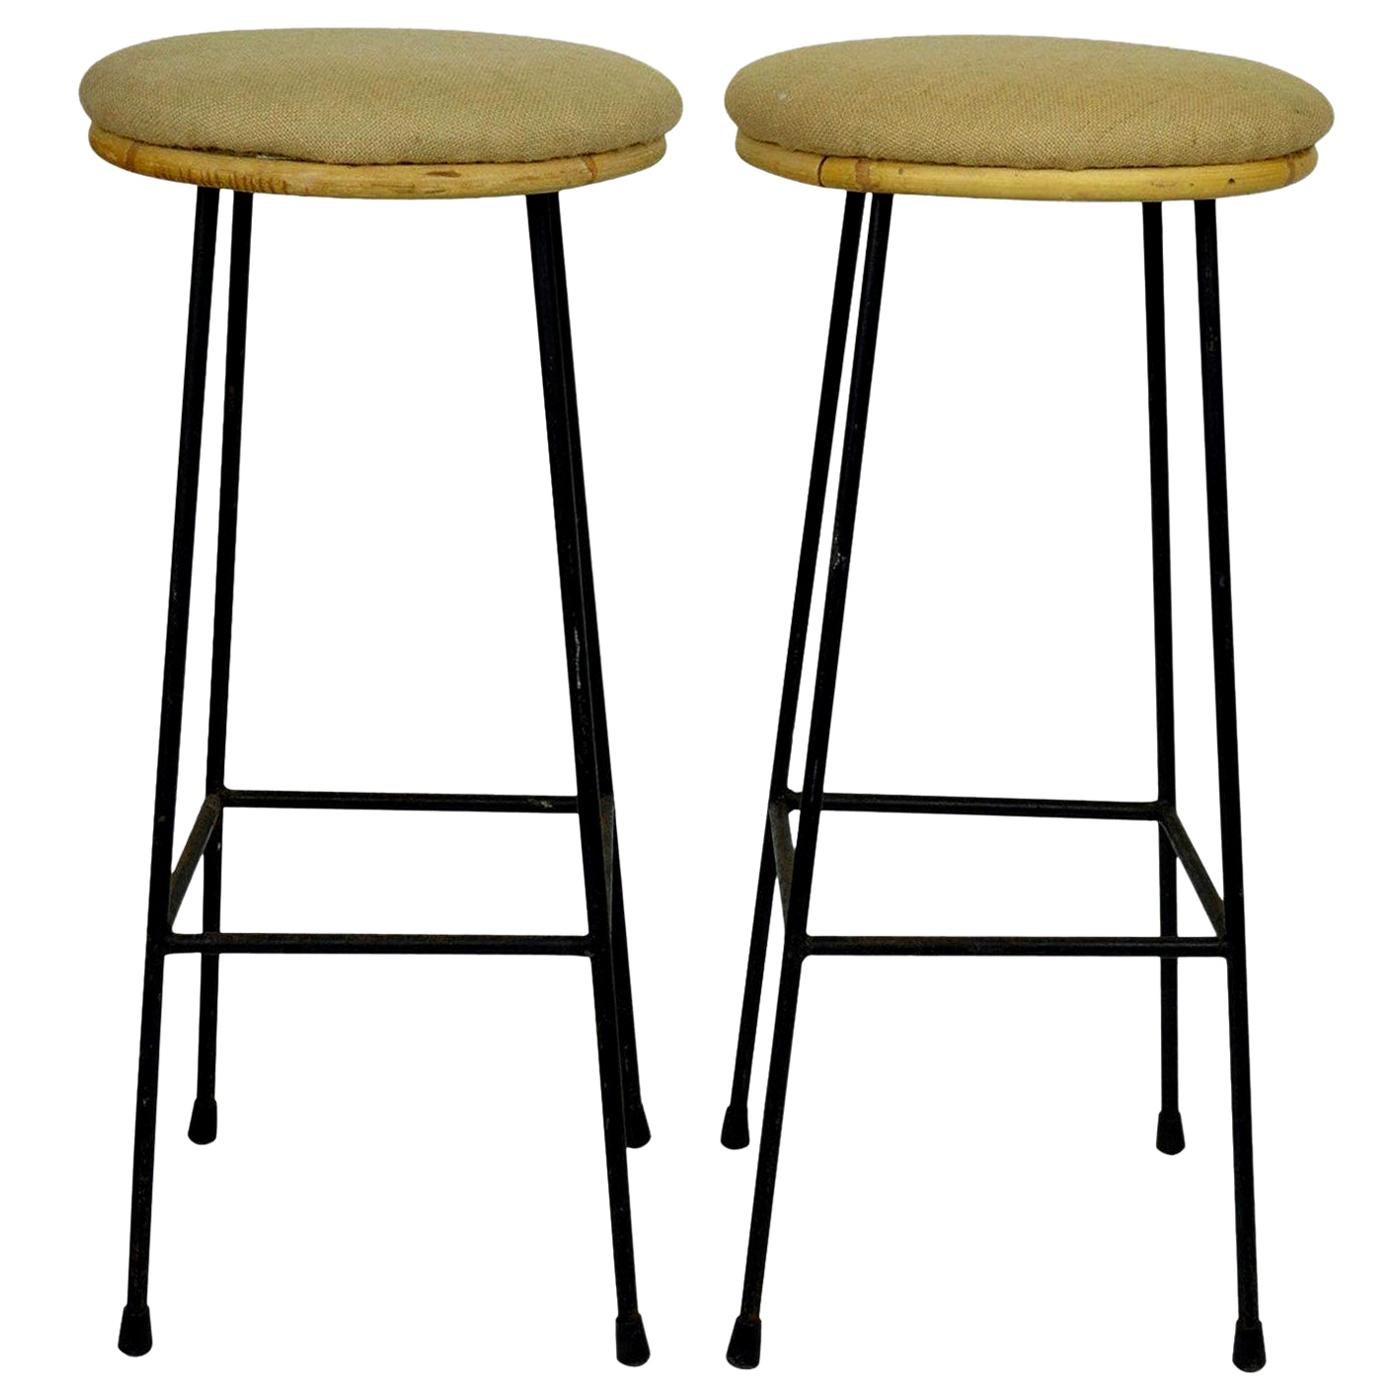 Pair of Midcentury Metal and Bamboo Bar Stools, 1950s